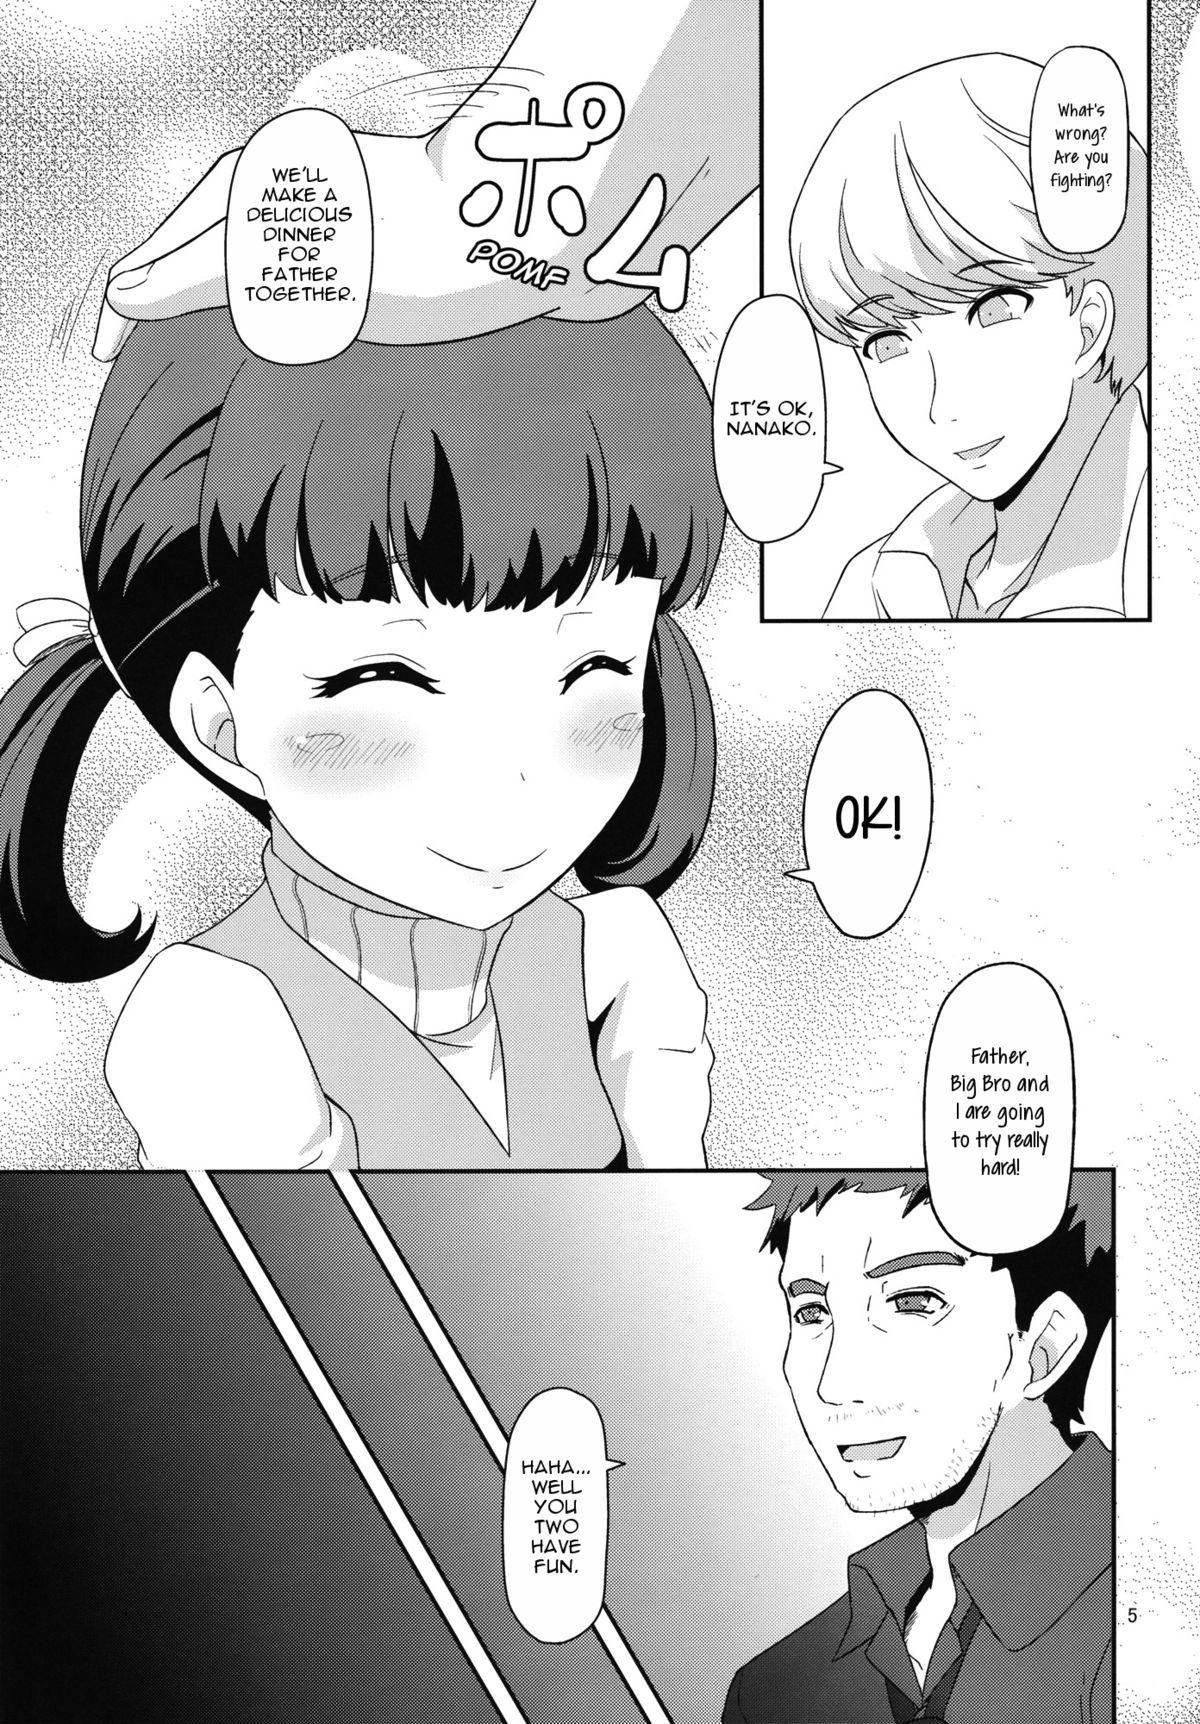 Wanking Oyomesan no Narikata | How to Become a Wife - Persona 4 Indian - Page 4